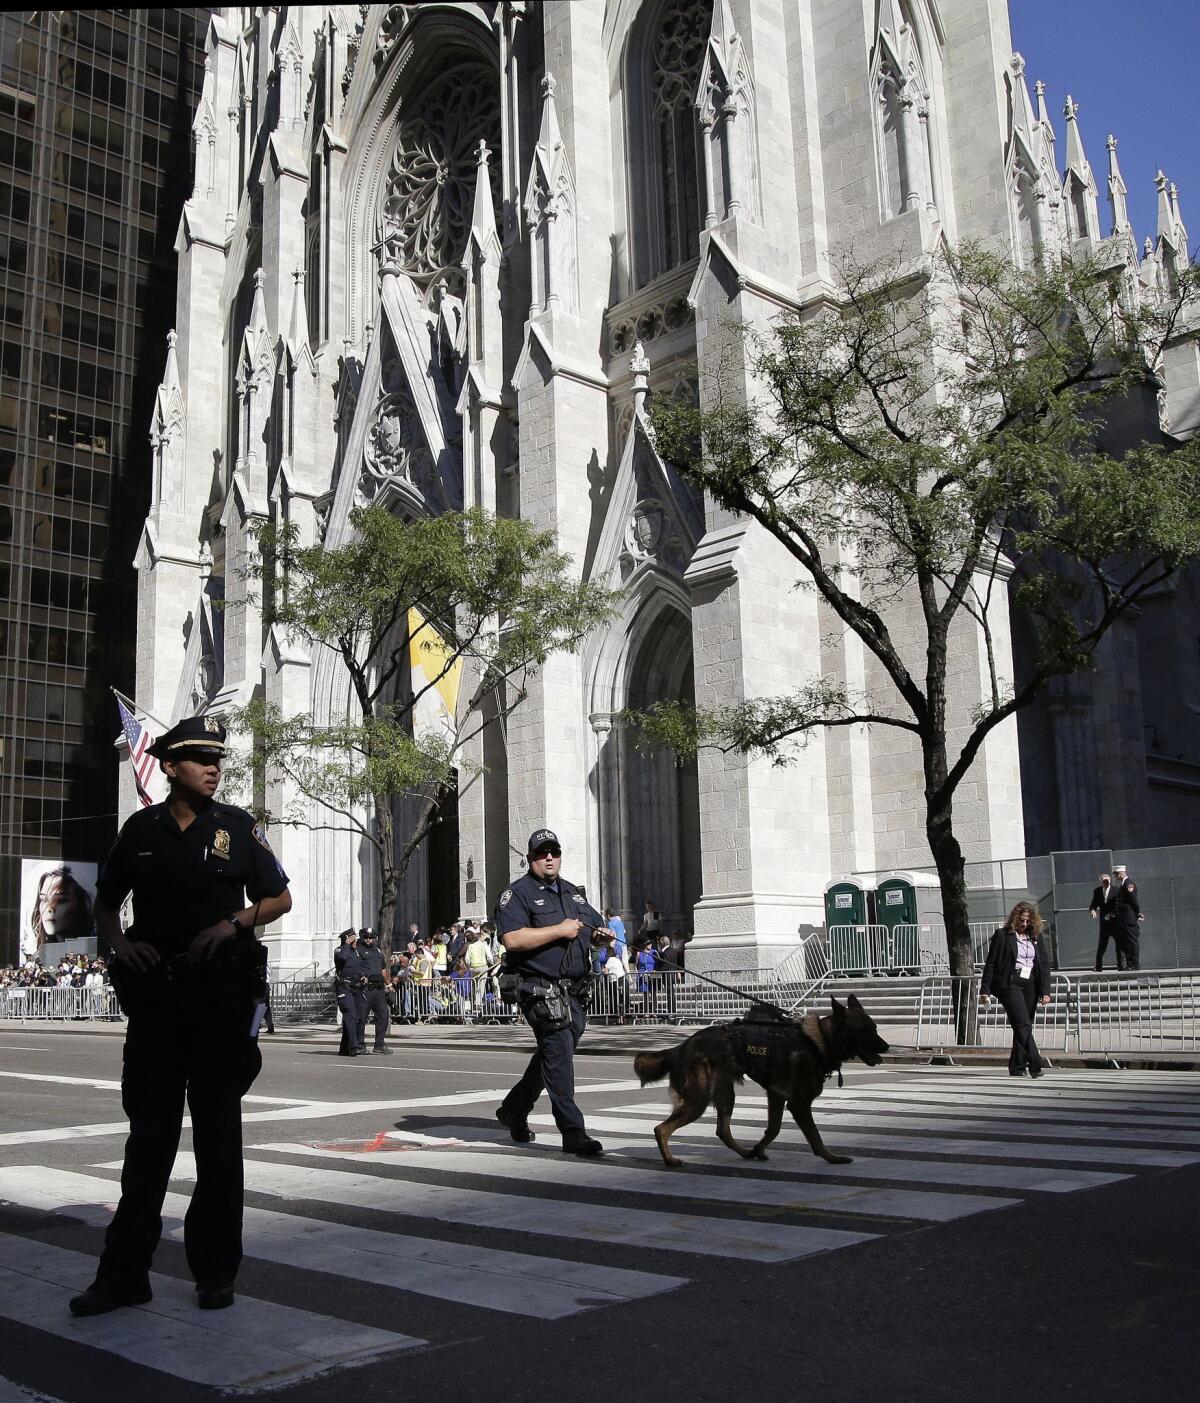 New York Police officers patrol Fifth Avenue in front of St. Patrick's Cathedral in preparation for Pope Francis' arrival to lead an evening prayer service. (AP Photo/Julie Jacobson)